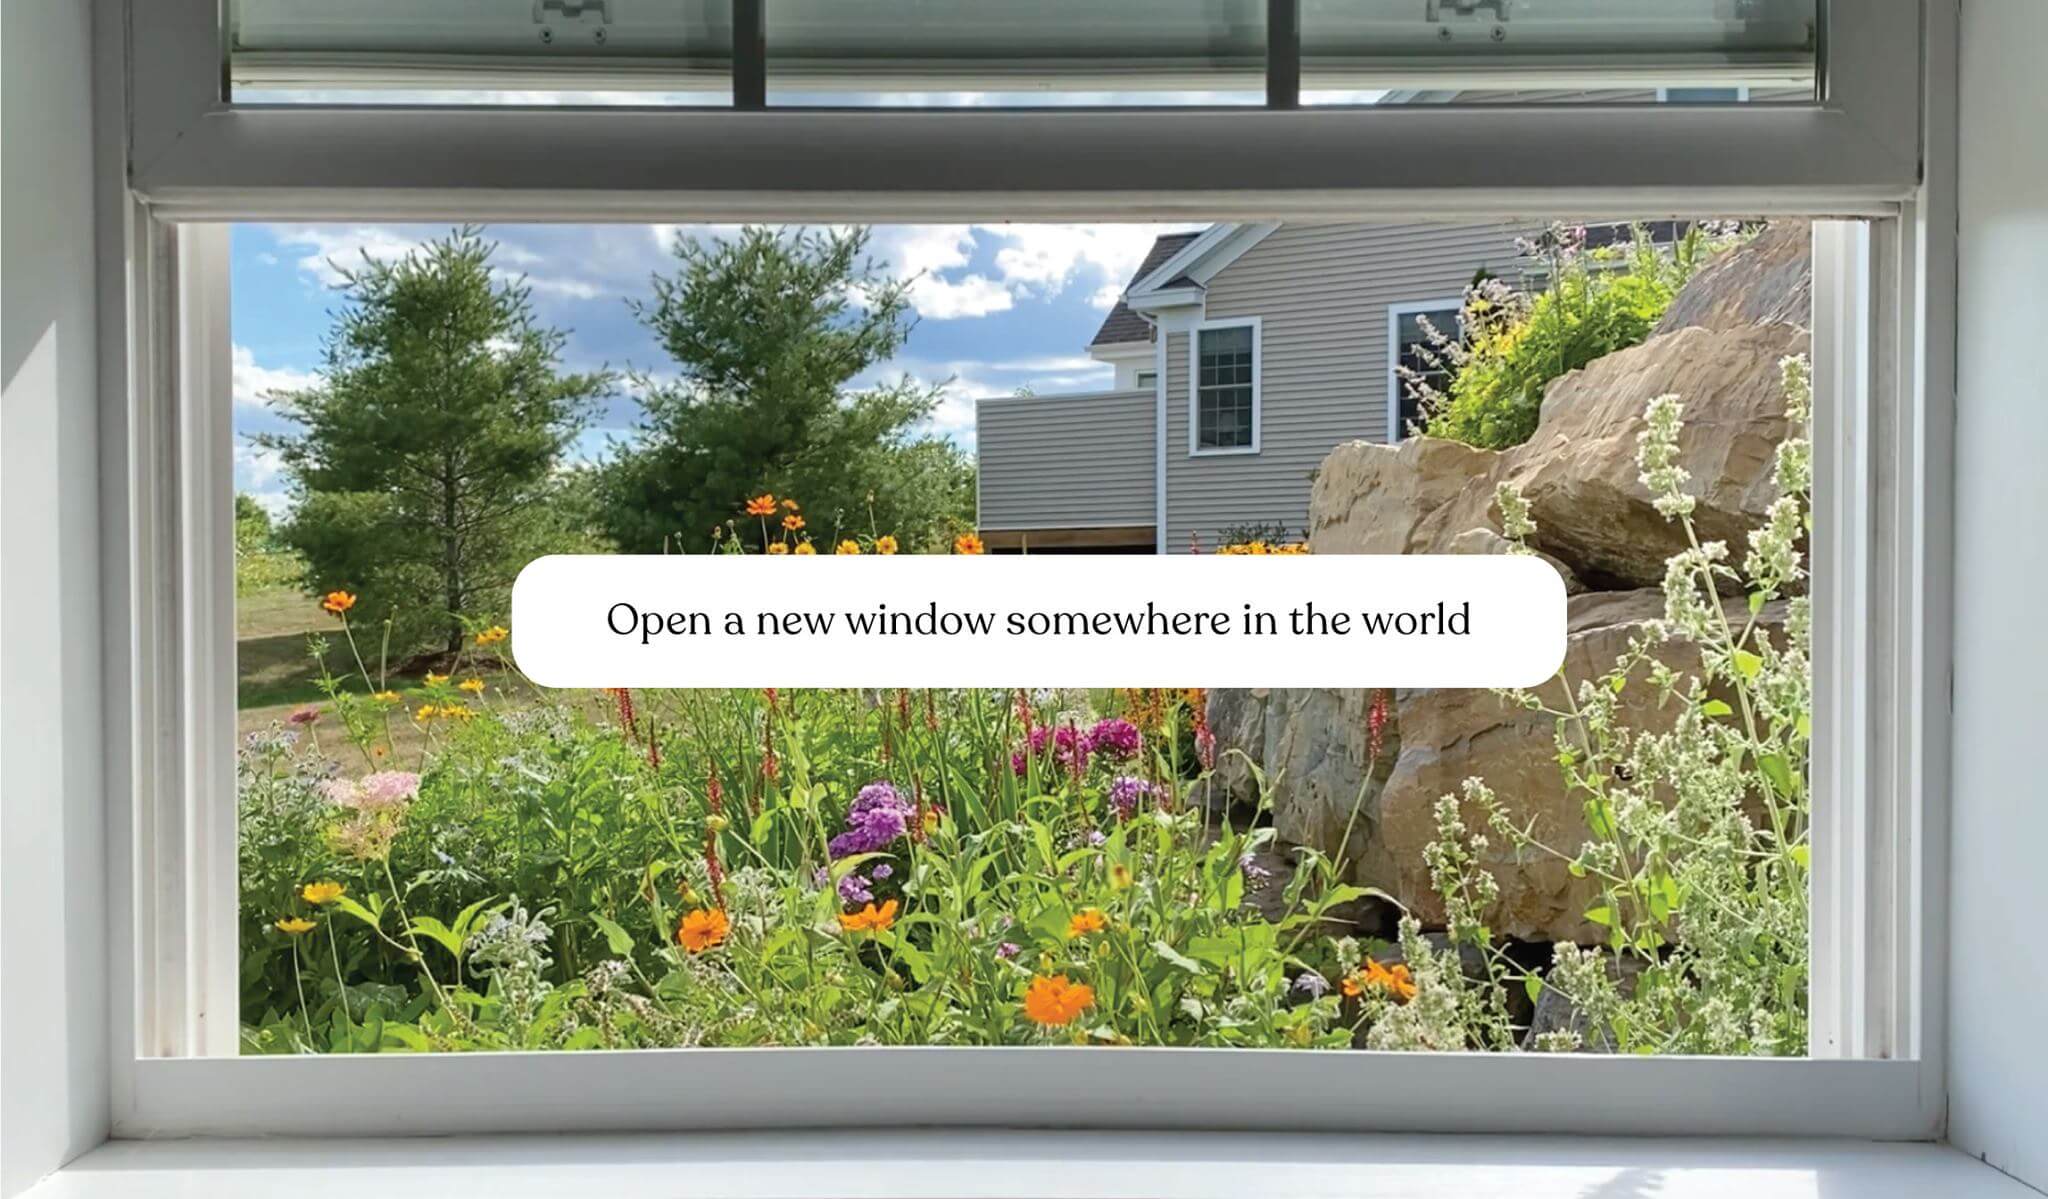 underrated websites  - window swap - Open a new window somewhere in the world